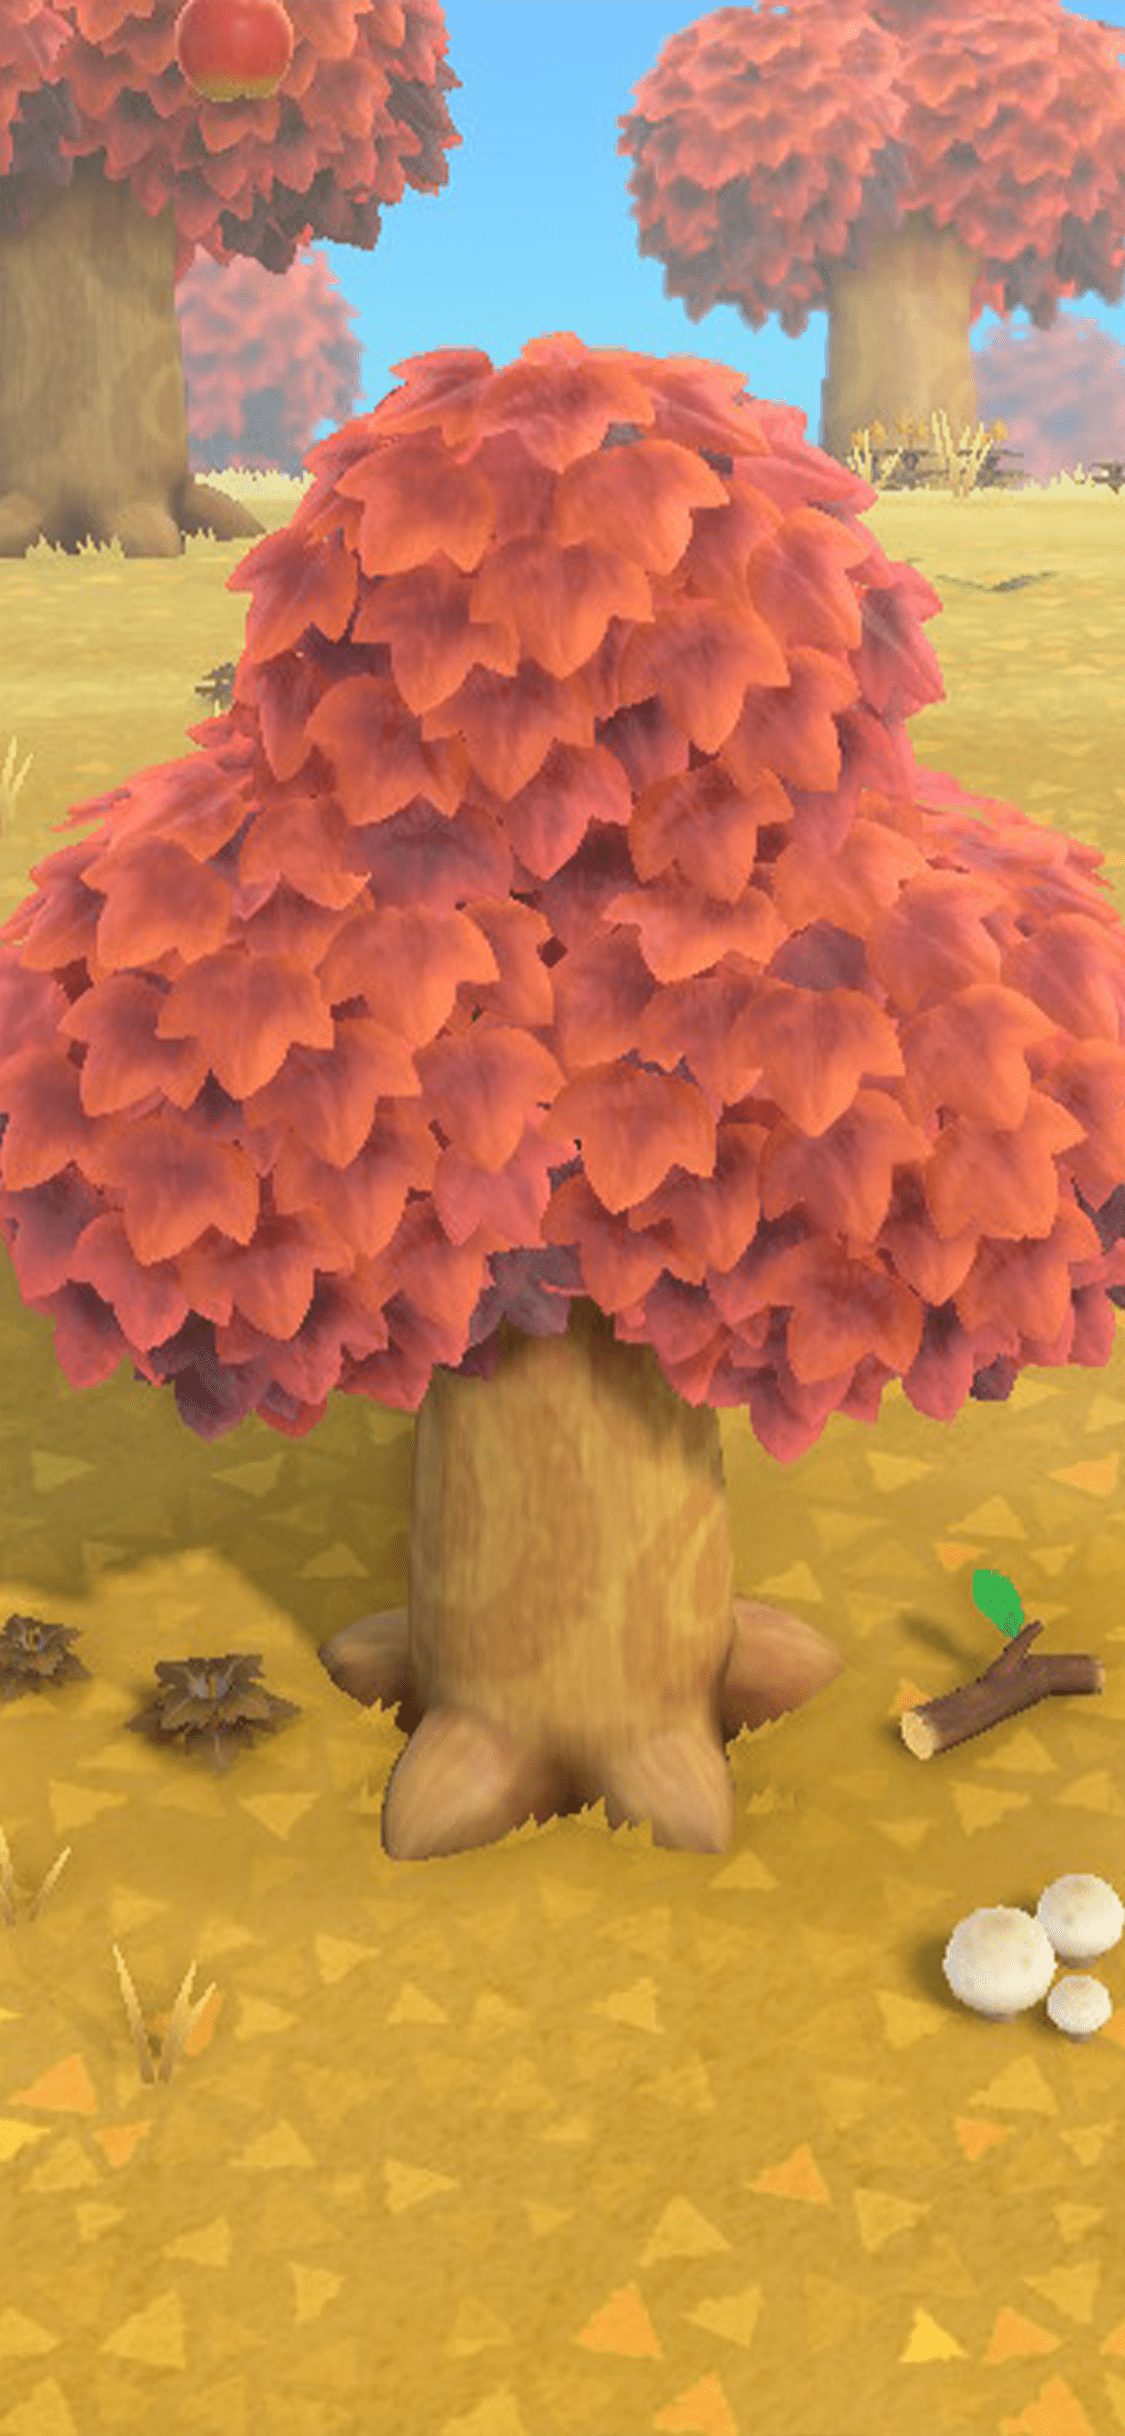 A mushroom with a pink and orange top in a grassy area. - Animal Crossing